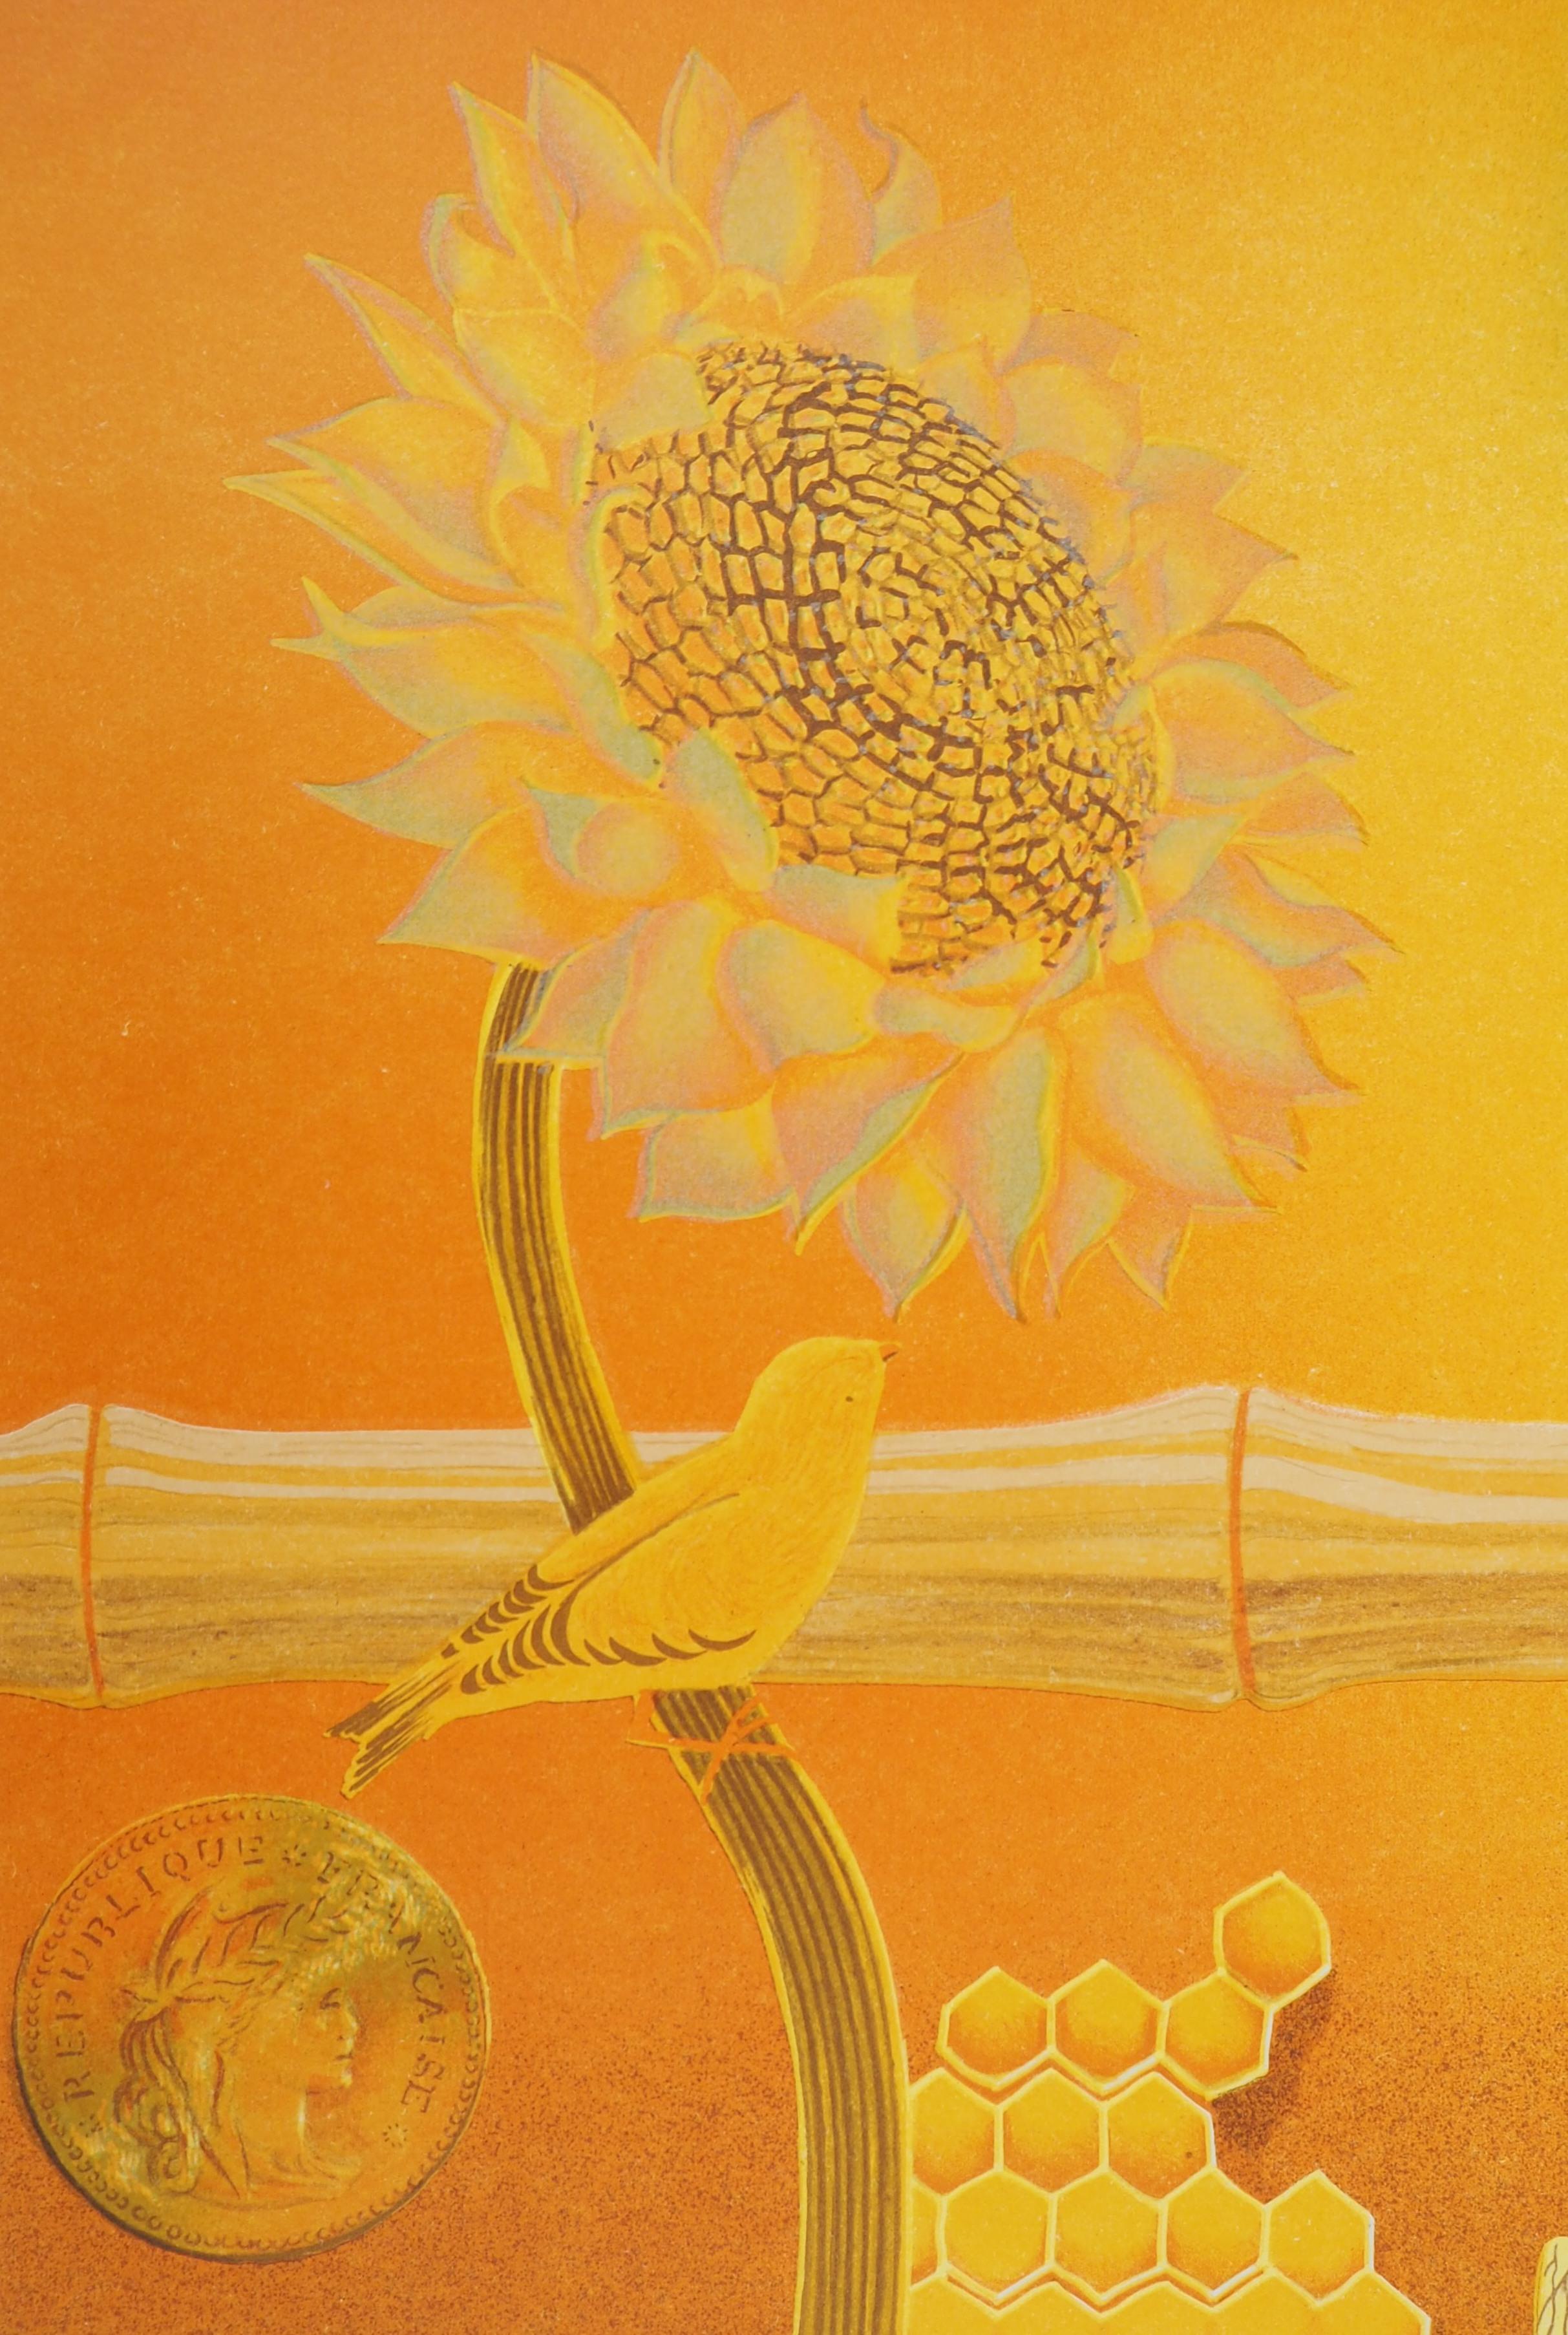 Peace : Buddha, Life in Yellow - Handsigned Lithograph, Limited to 250 copies For Sale 1